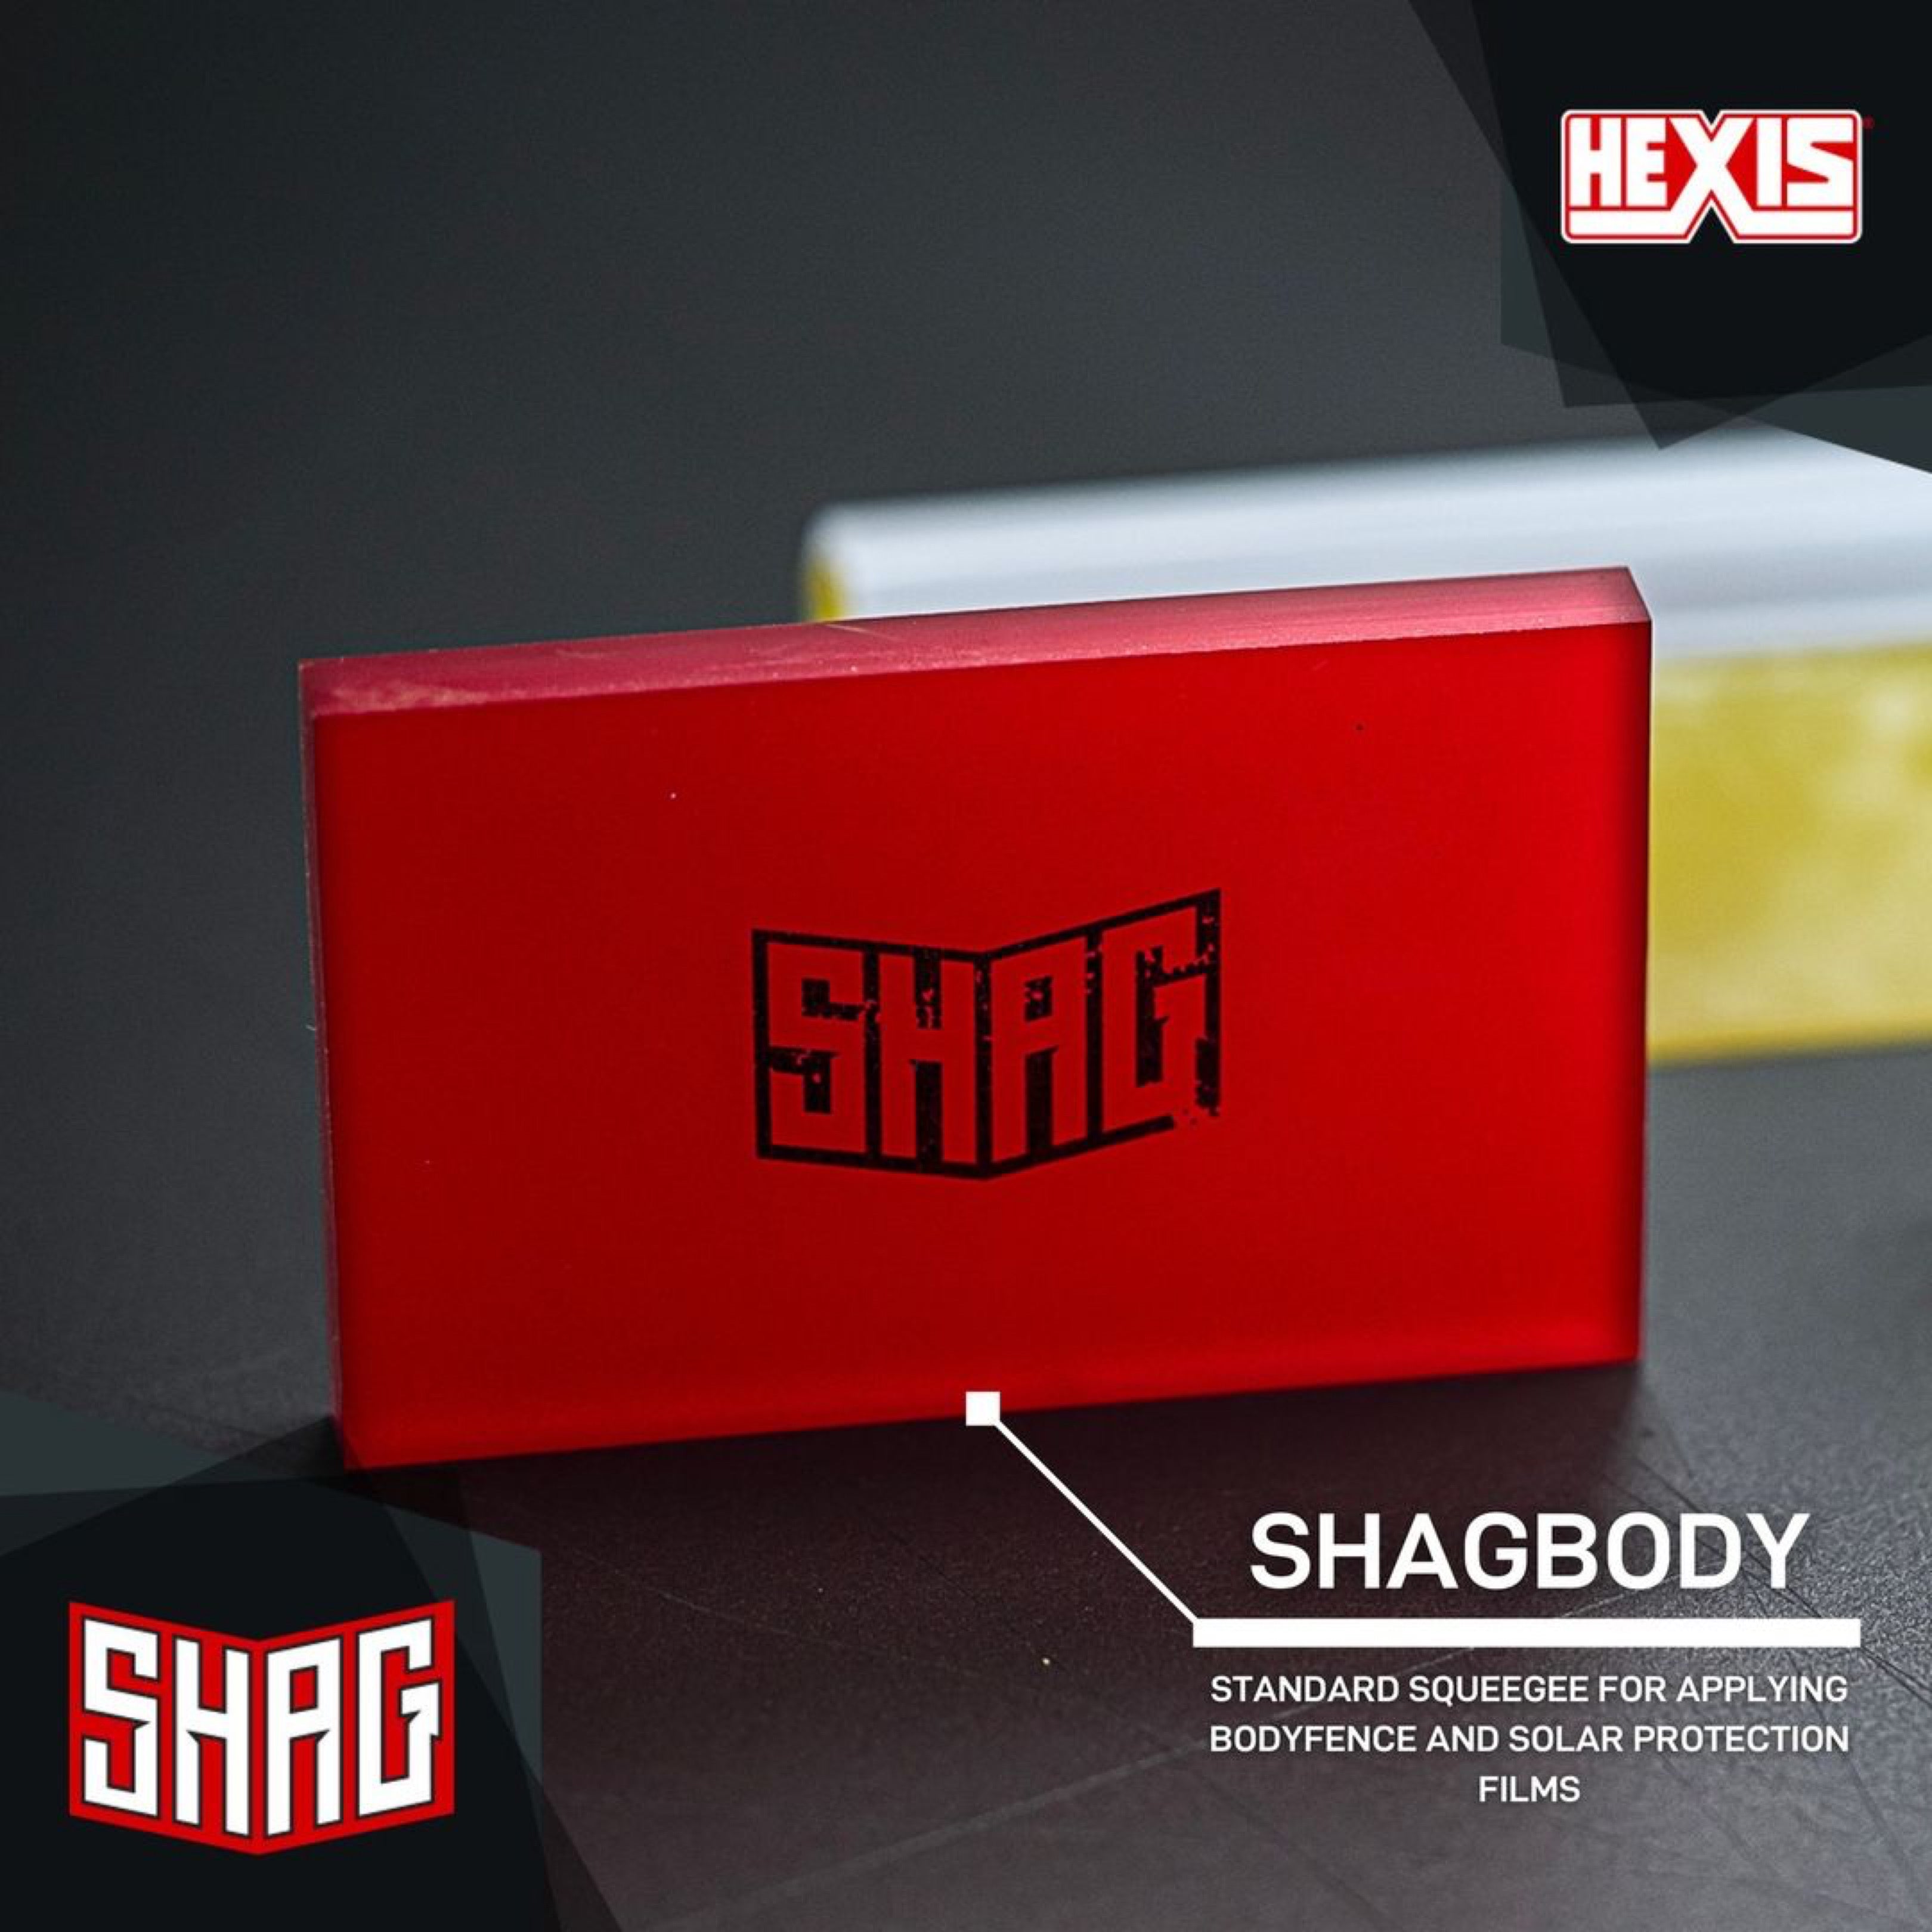 hexis shagbody soft red squeegee